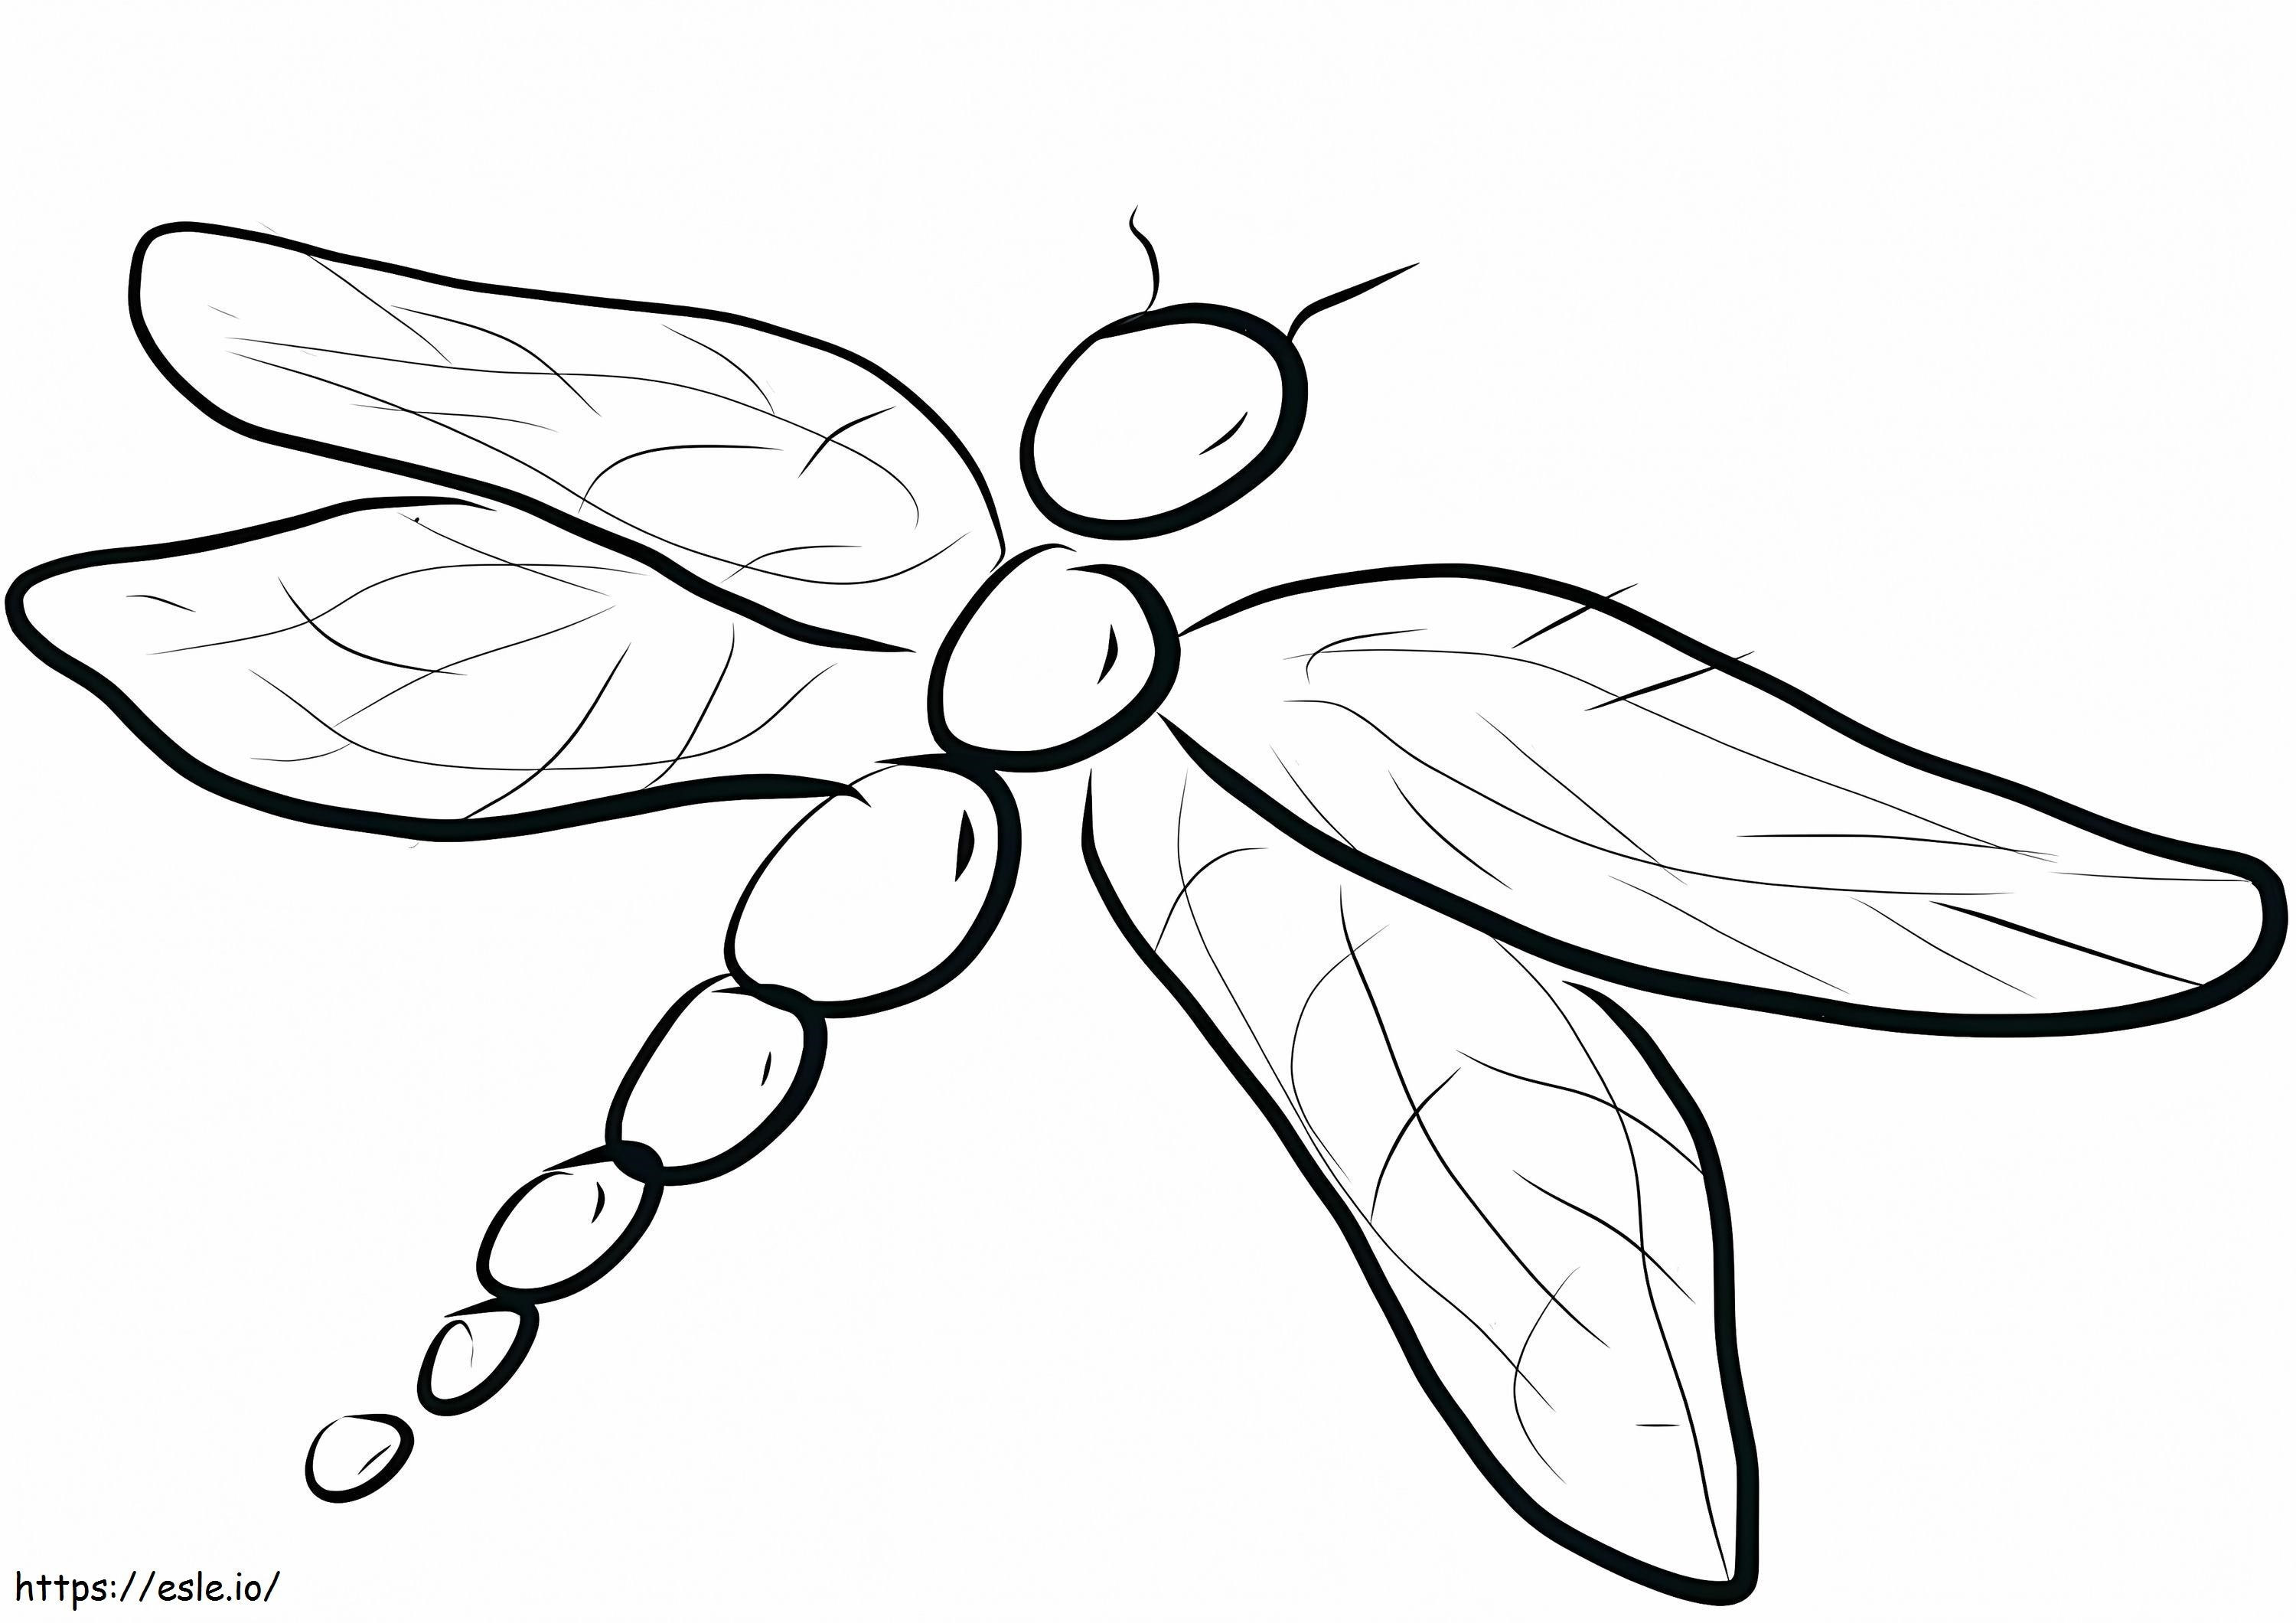 A Simple Dragonfly coloring page